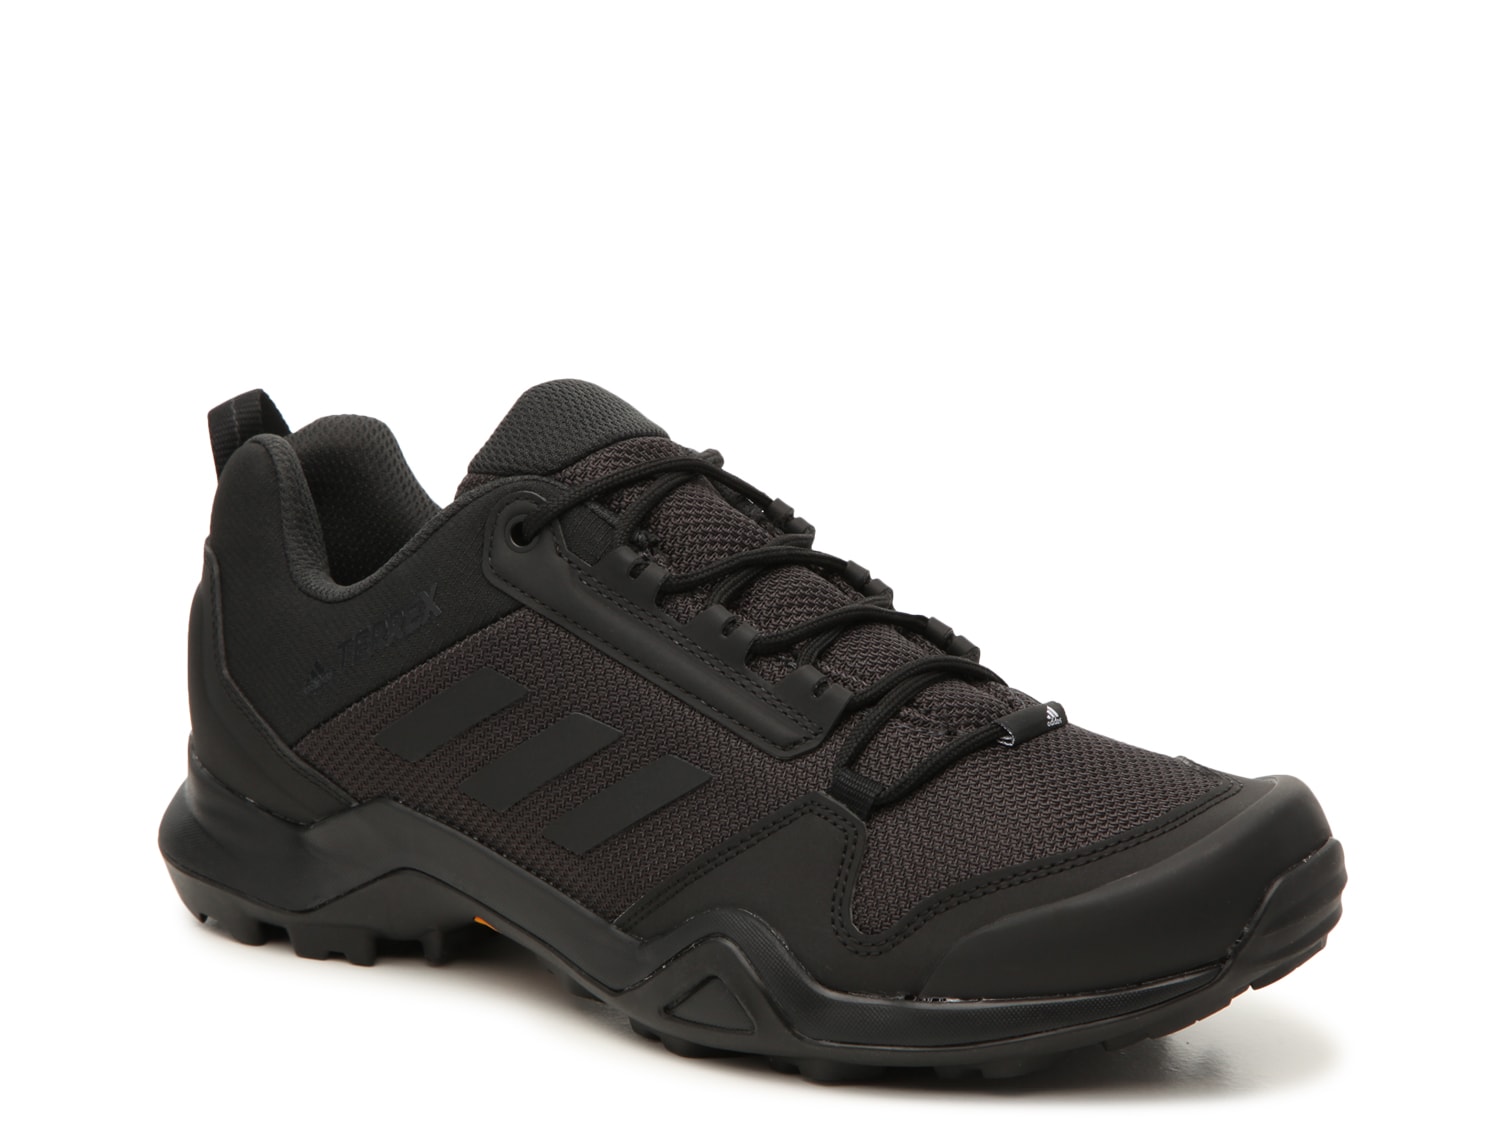 adidas work shoes up to 65% off